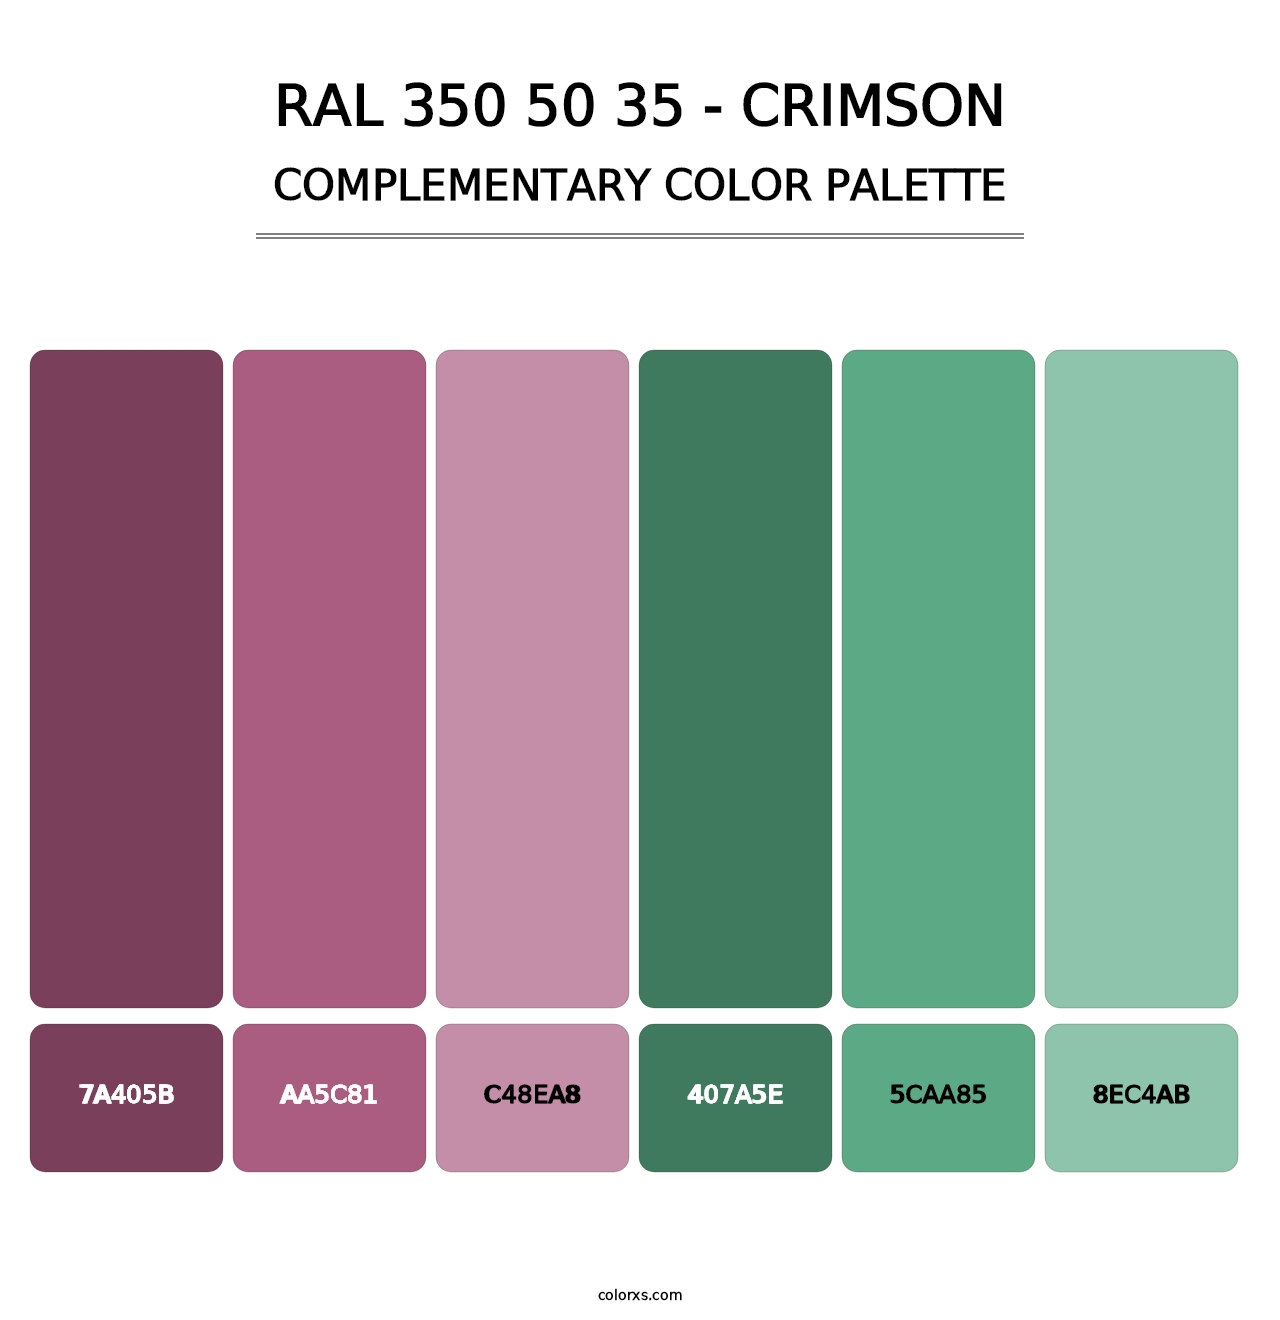 RAL 350 50 35 - Crimson - Complementary Color Palette